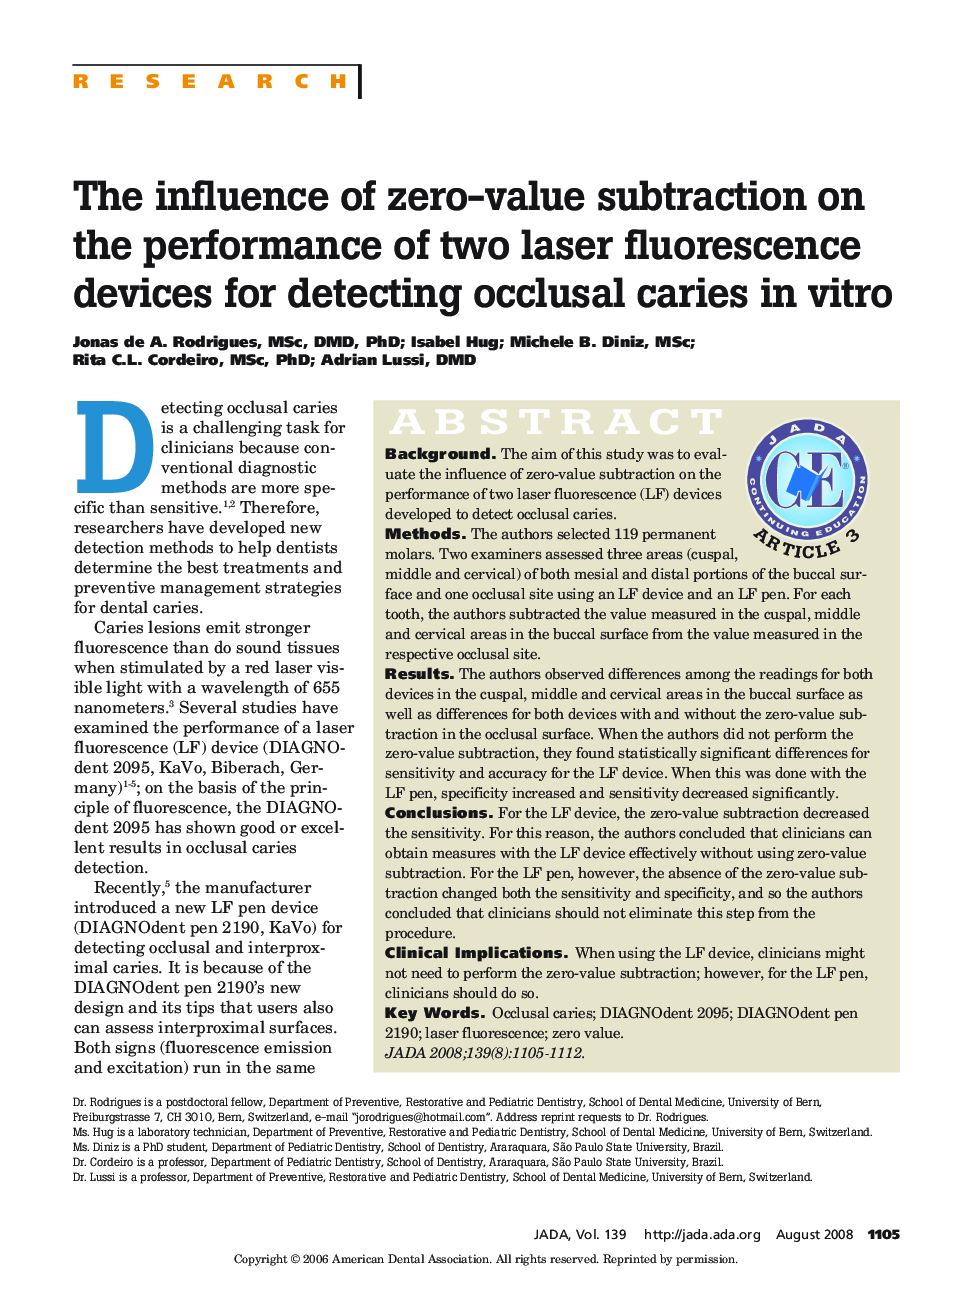 The Influence of Zero-Value Subtraction on the Performance of Two Laser Fluorescence Devices for Detecting Occlusal Caries In Vitro